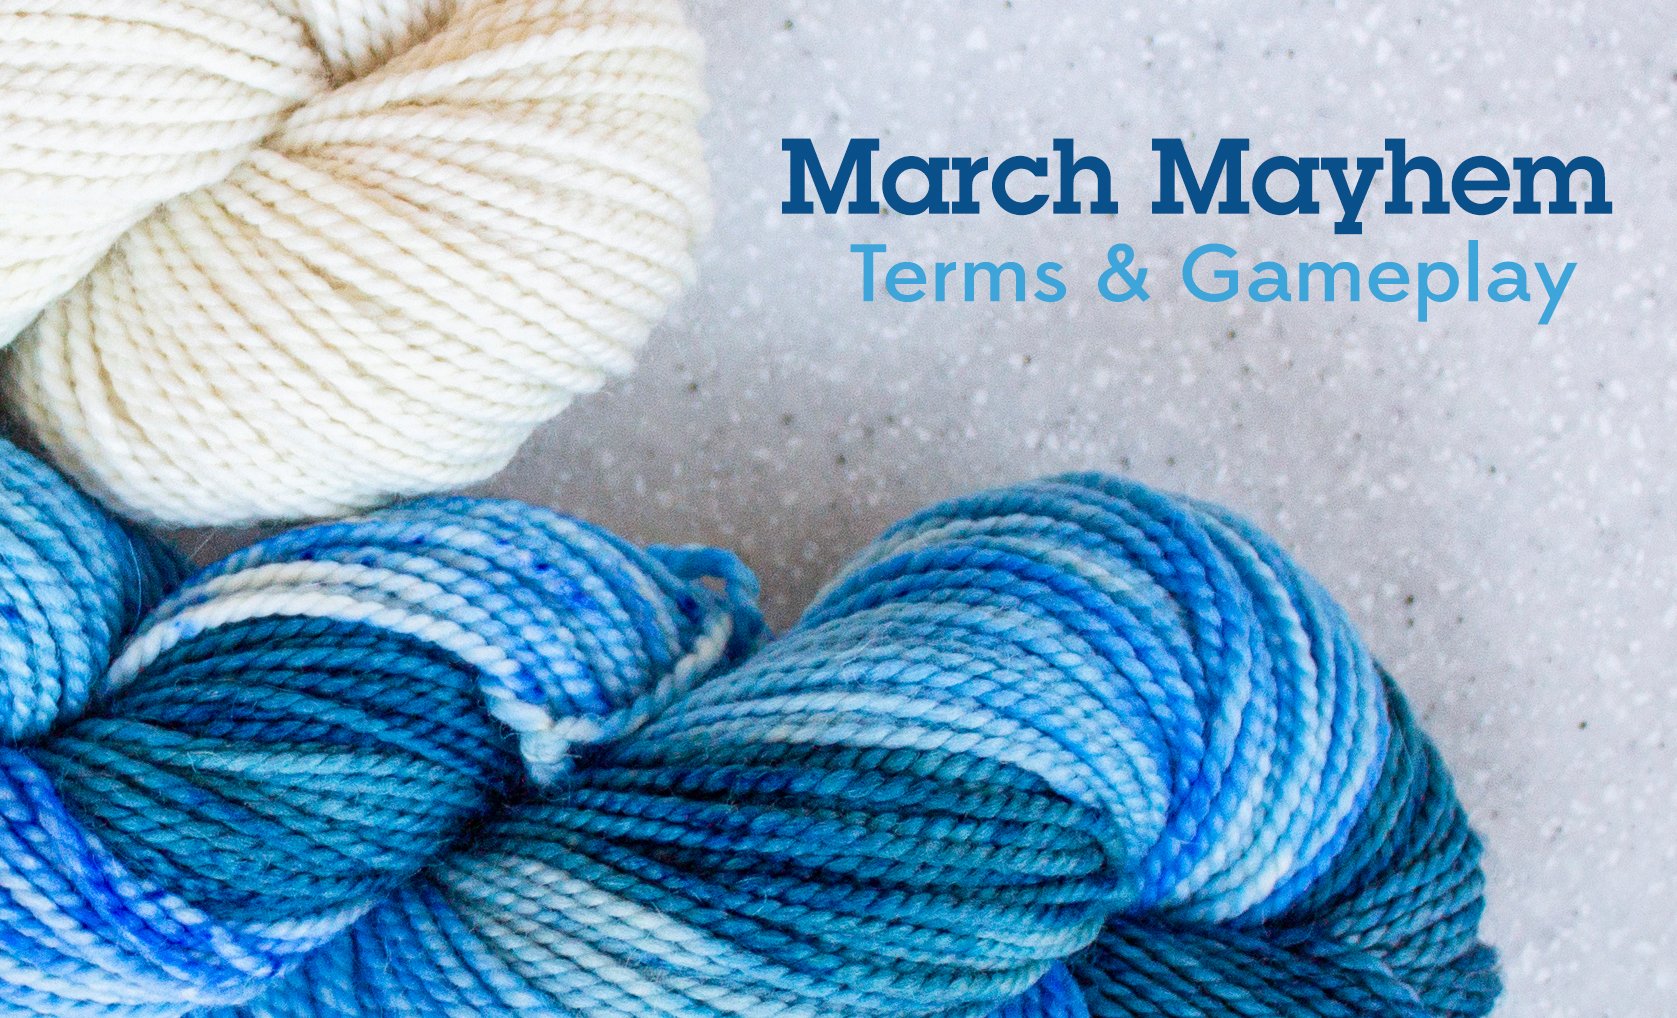 March Mayhem – a Dyer’s Competition